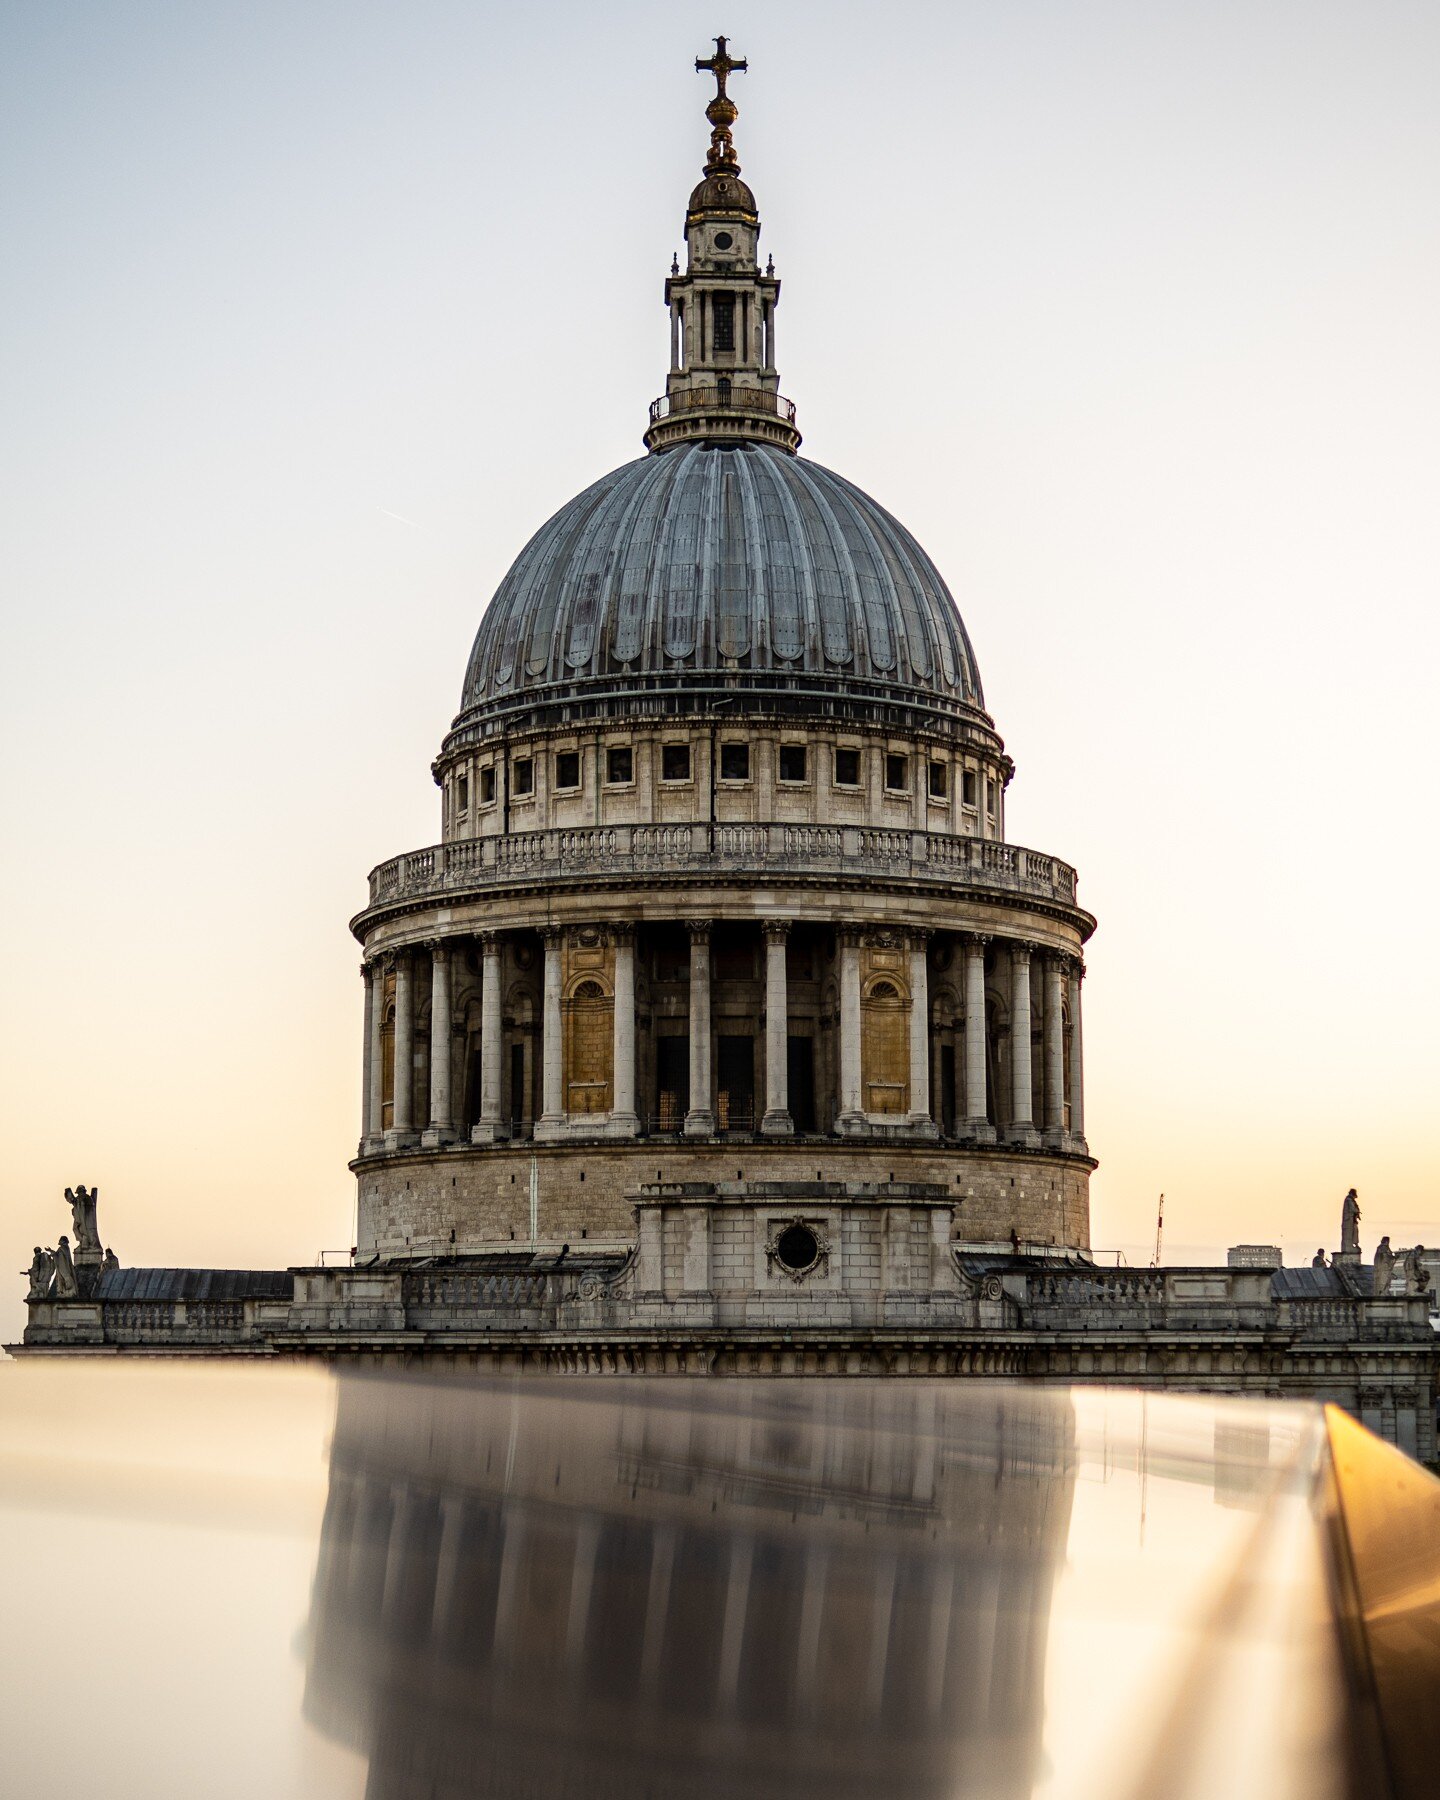 Posts containing anything from Scotland always do better, its a fact, so here's St Paul's again in London 😂 Two days two reflections what a treat. ✌️
.
.
.
.
.
.
.
.
#yourbritain #newfoundland #sunset #stpaulscathedral #thisislondon #london #visitlo